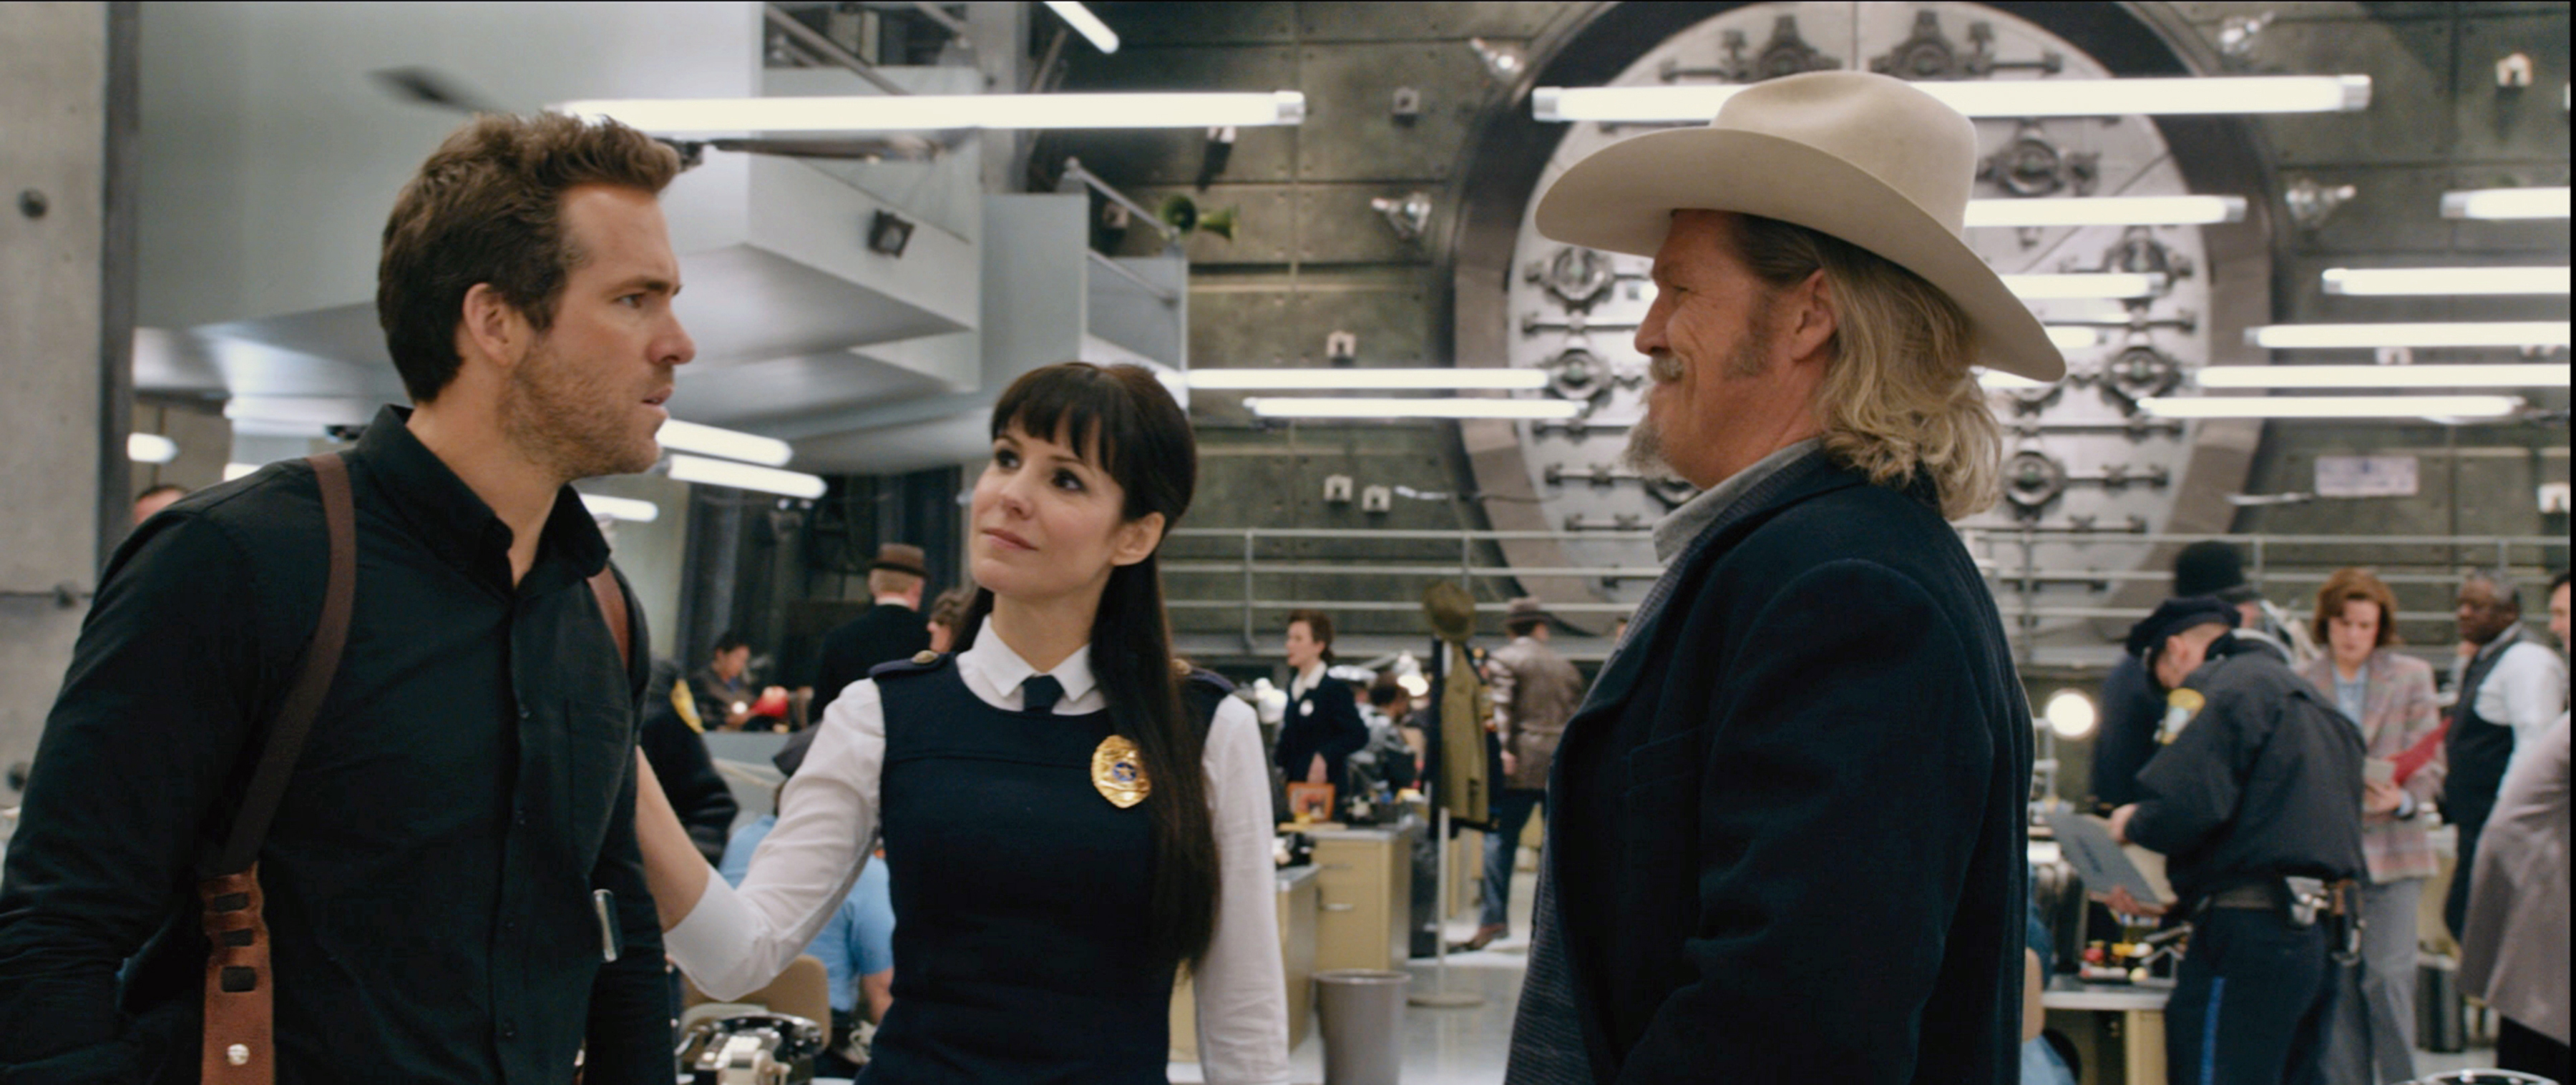 Ryan Reynolds, Mary-Louise Parker and Jeff Bridges in R.I.P.D.